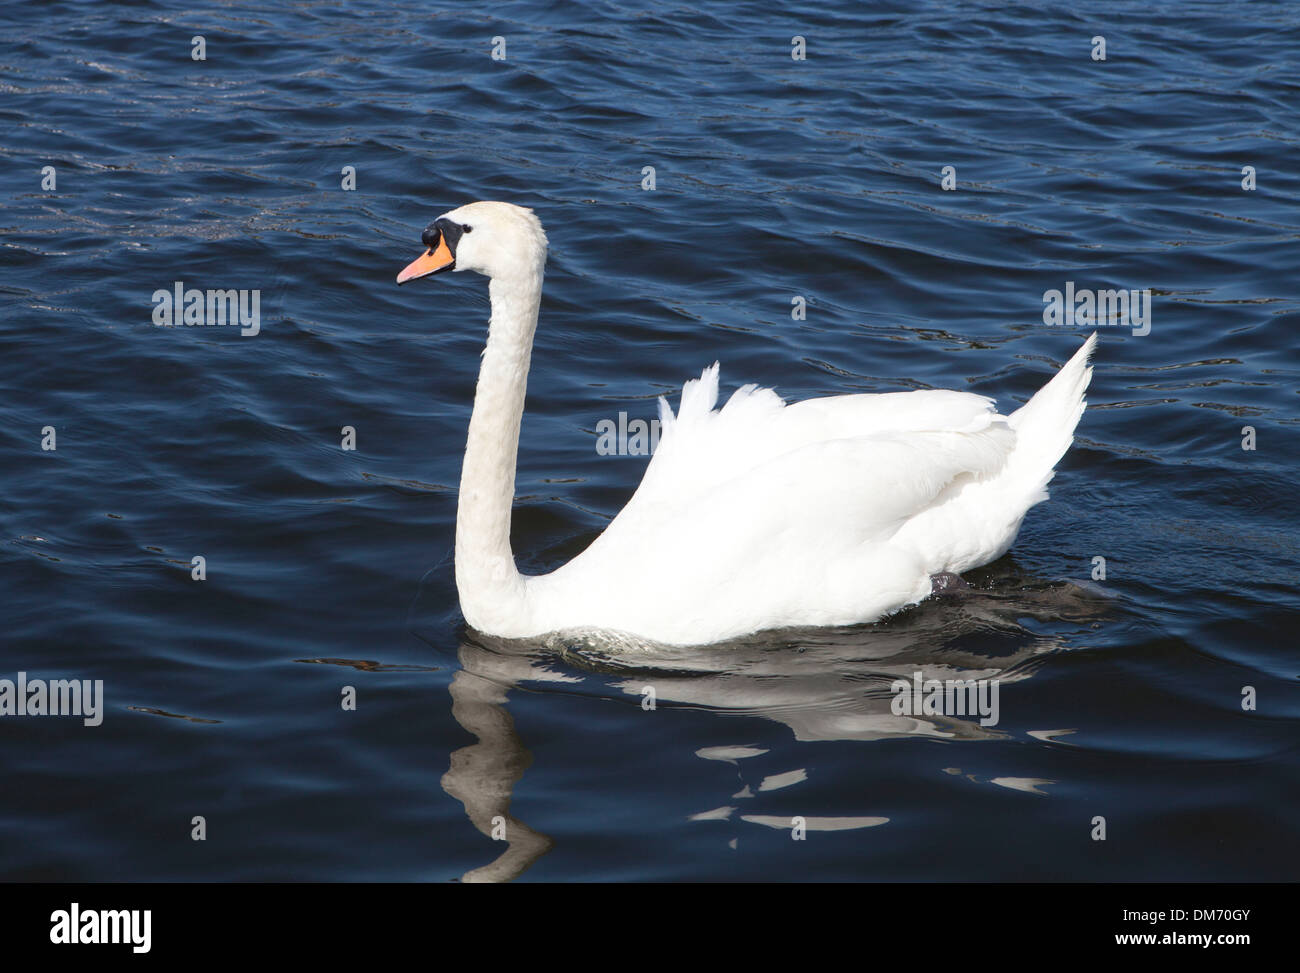 White swan in Dutch canal Stock Photo